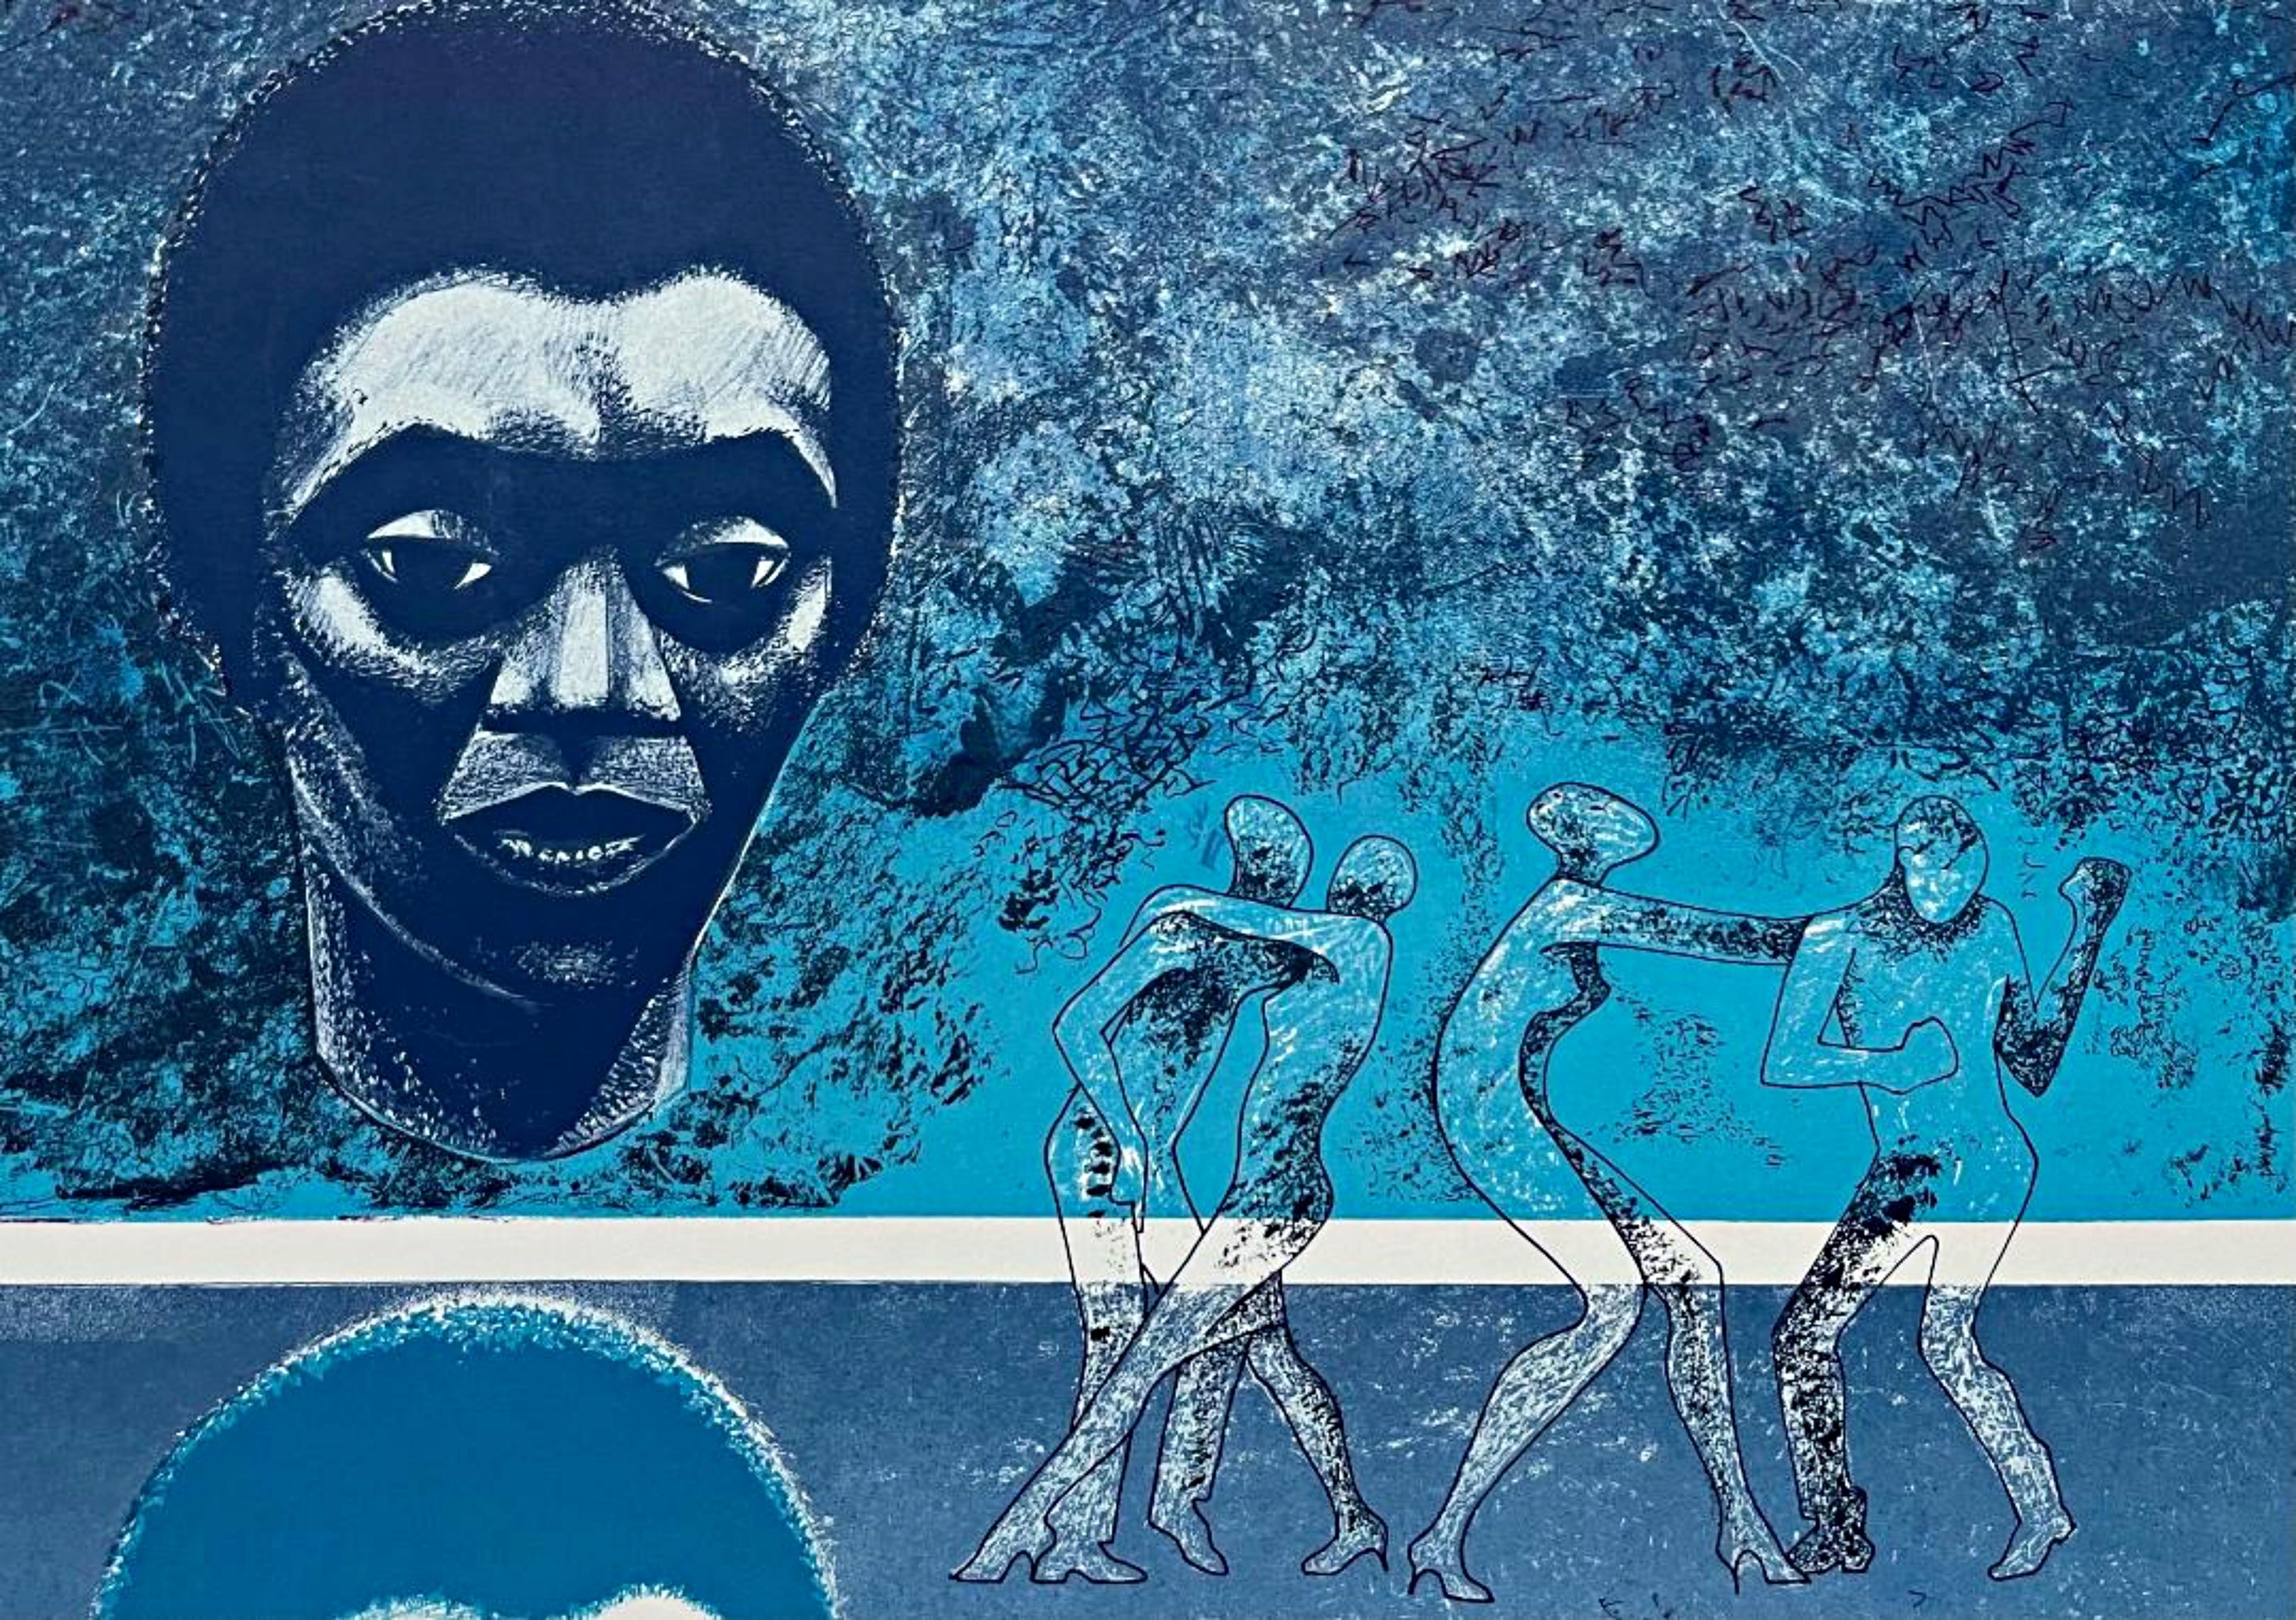 Elizabeth Catlett
Blues, 1983
Color lithograph on cream wove paper
Signed, titled, dated and numbered in graphite pencil on the front
Printed and published by the Brandywine Workshop, Philadelphia, PA.
Frame included: elegantly matted and framed in